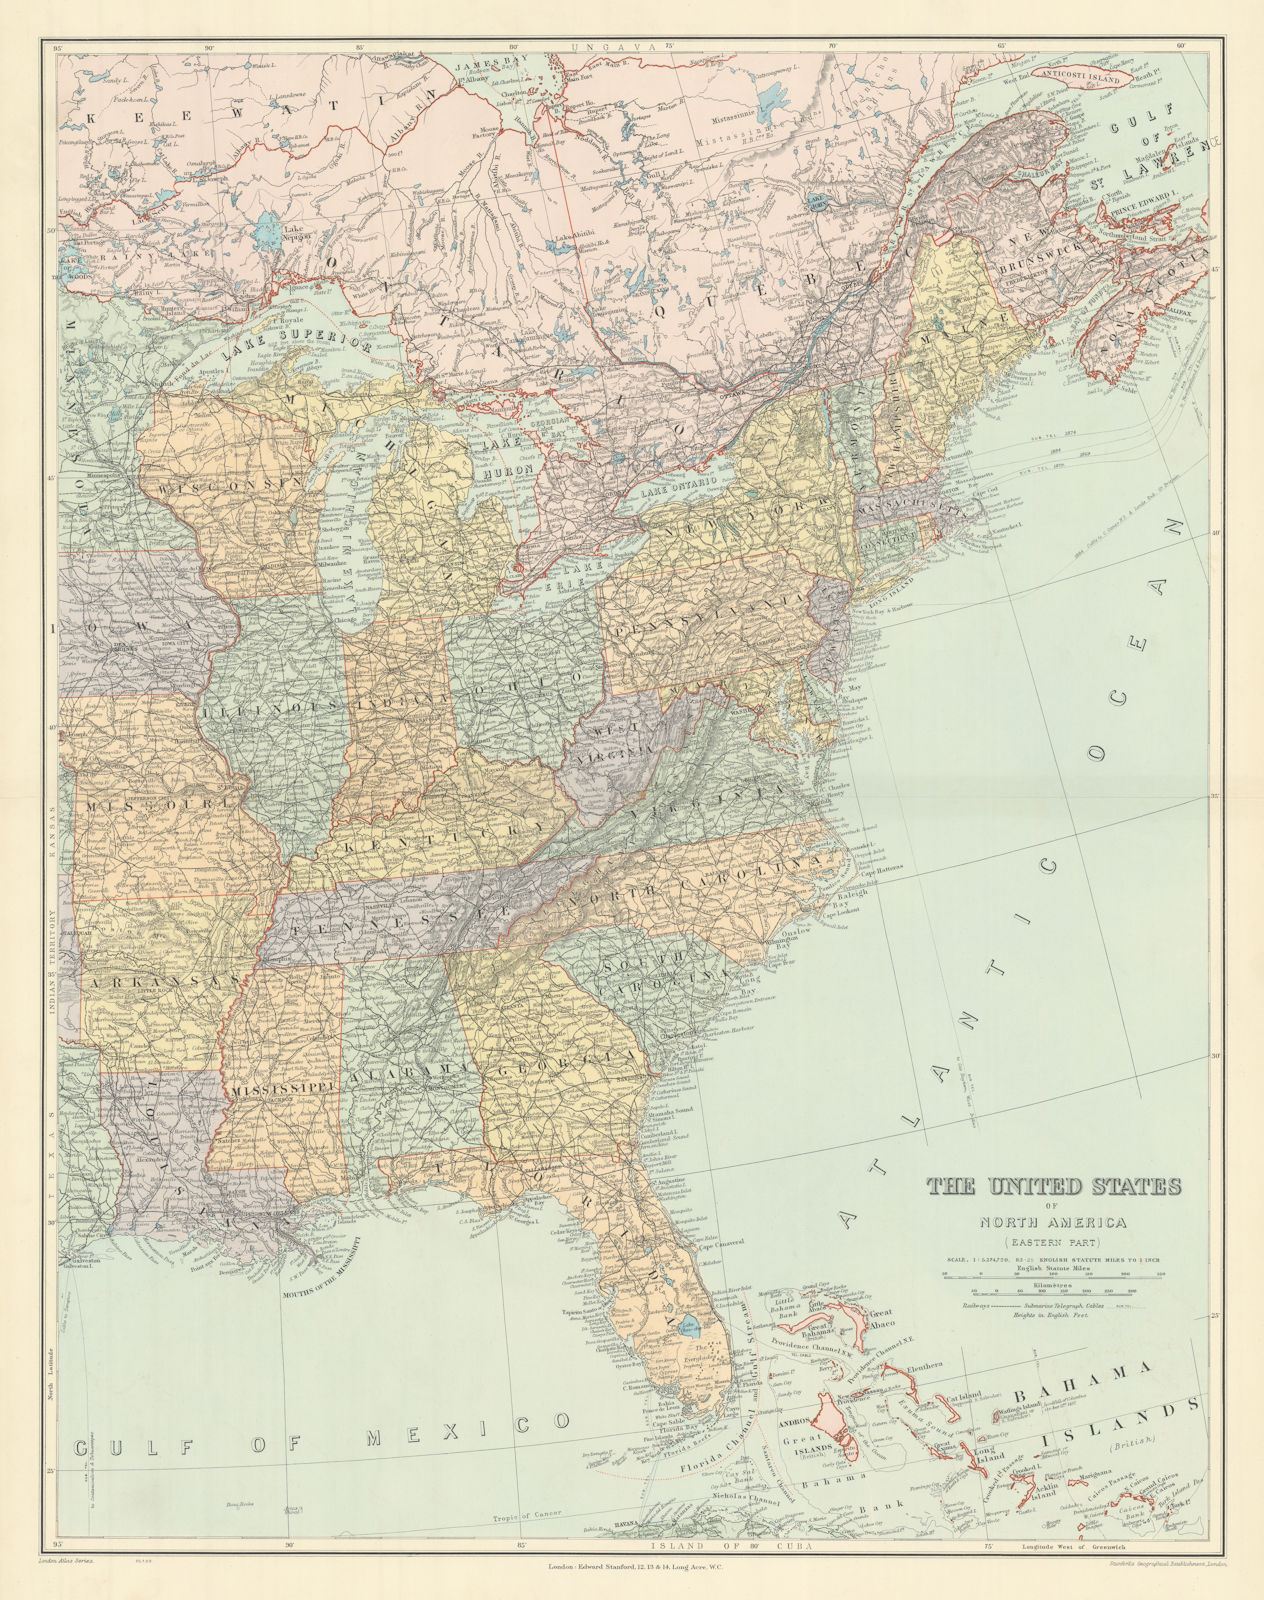 Associate Product The United States of North America, Eastern part. USA. 69x54cm STANFORD 1904 map